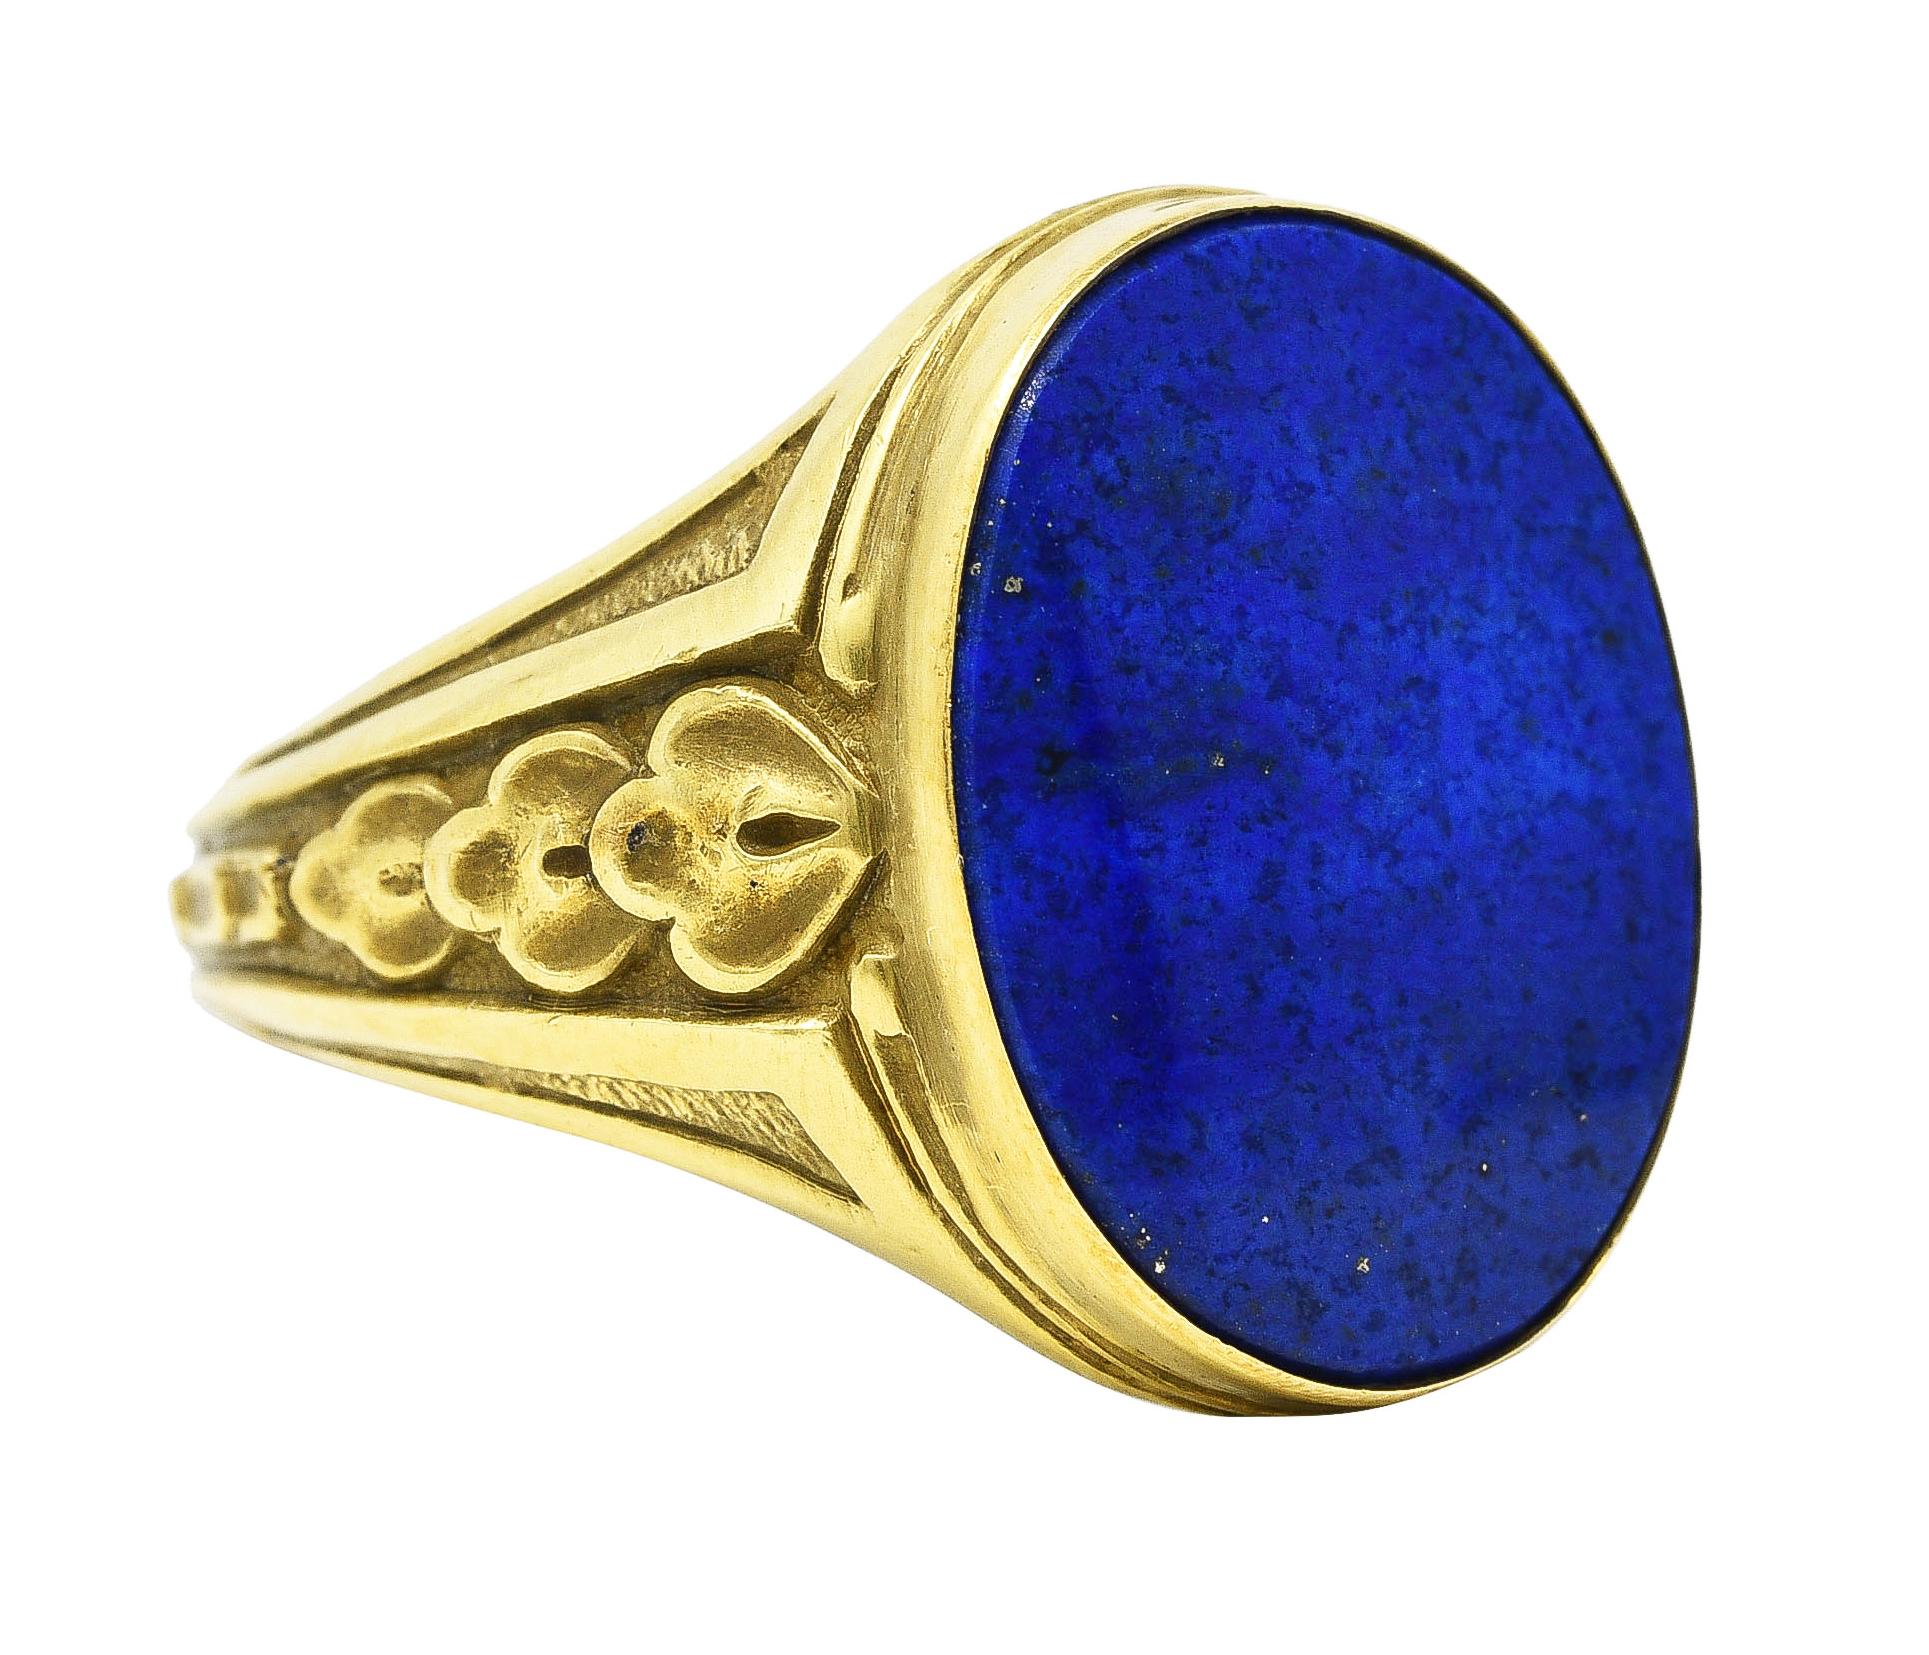 Signet style ring features an oval face measuring approximately 18.0 x 14.0 mm. Flushly inset with an oval tablet of lapis lazuli. Opaque and strongly ultramarine blue in color with subdued mottling and very few gold pyrite flecks. Mounting is